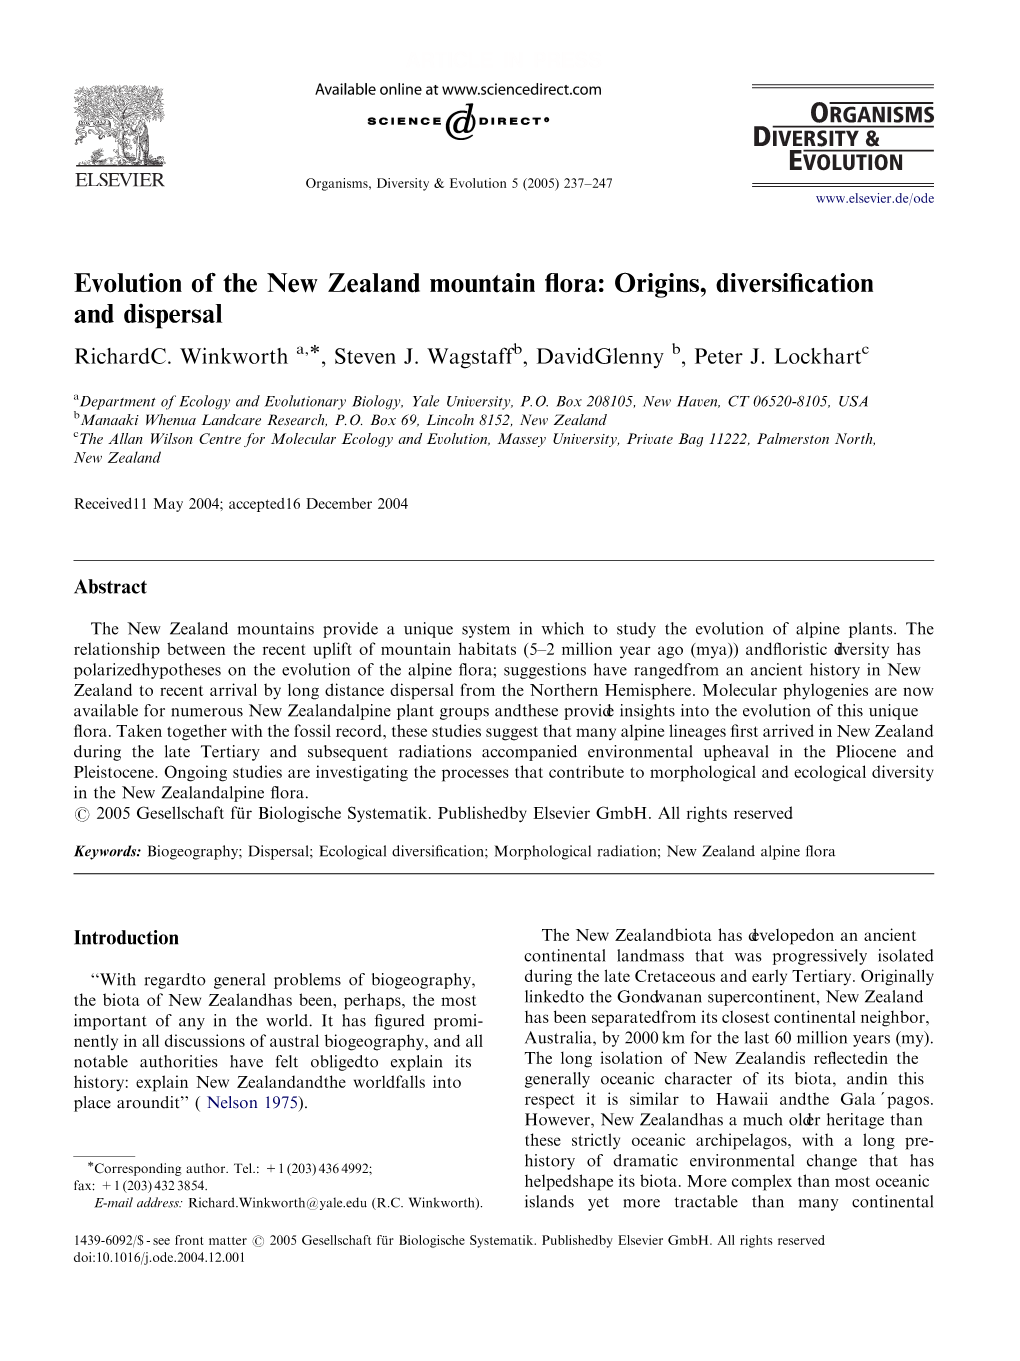 Evolution of the New Zealand Mountain Flora